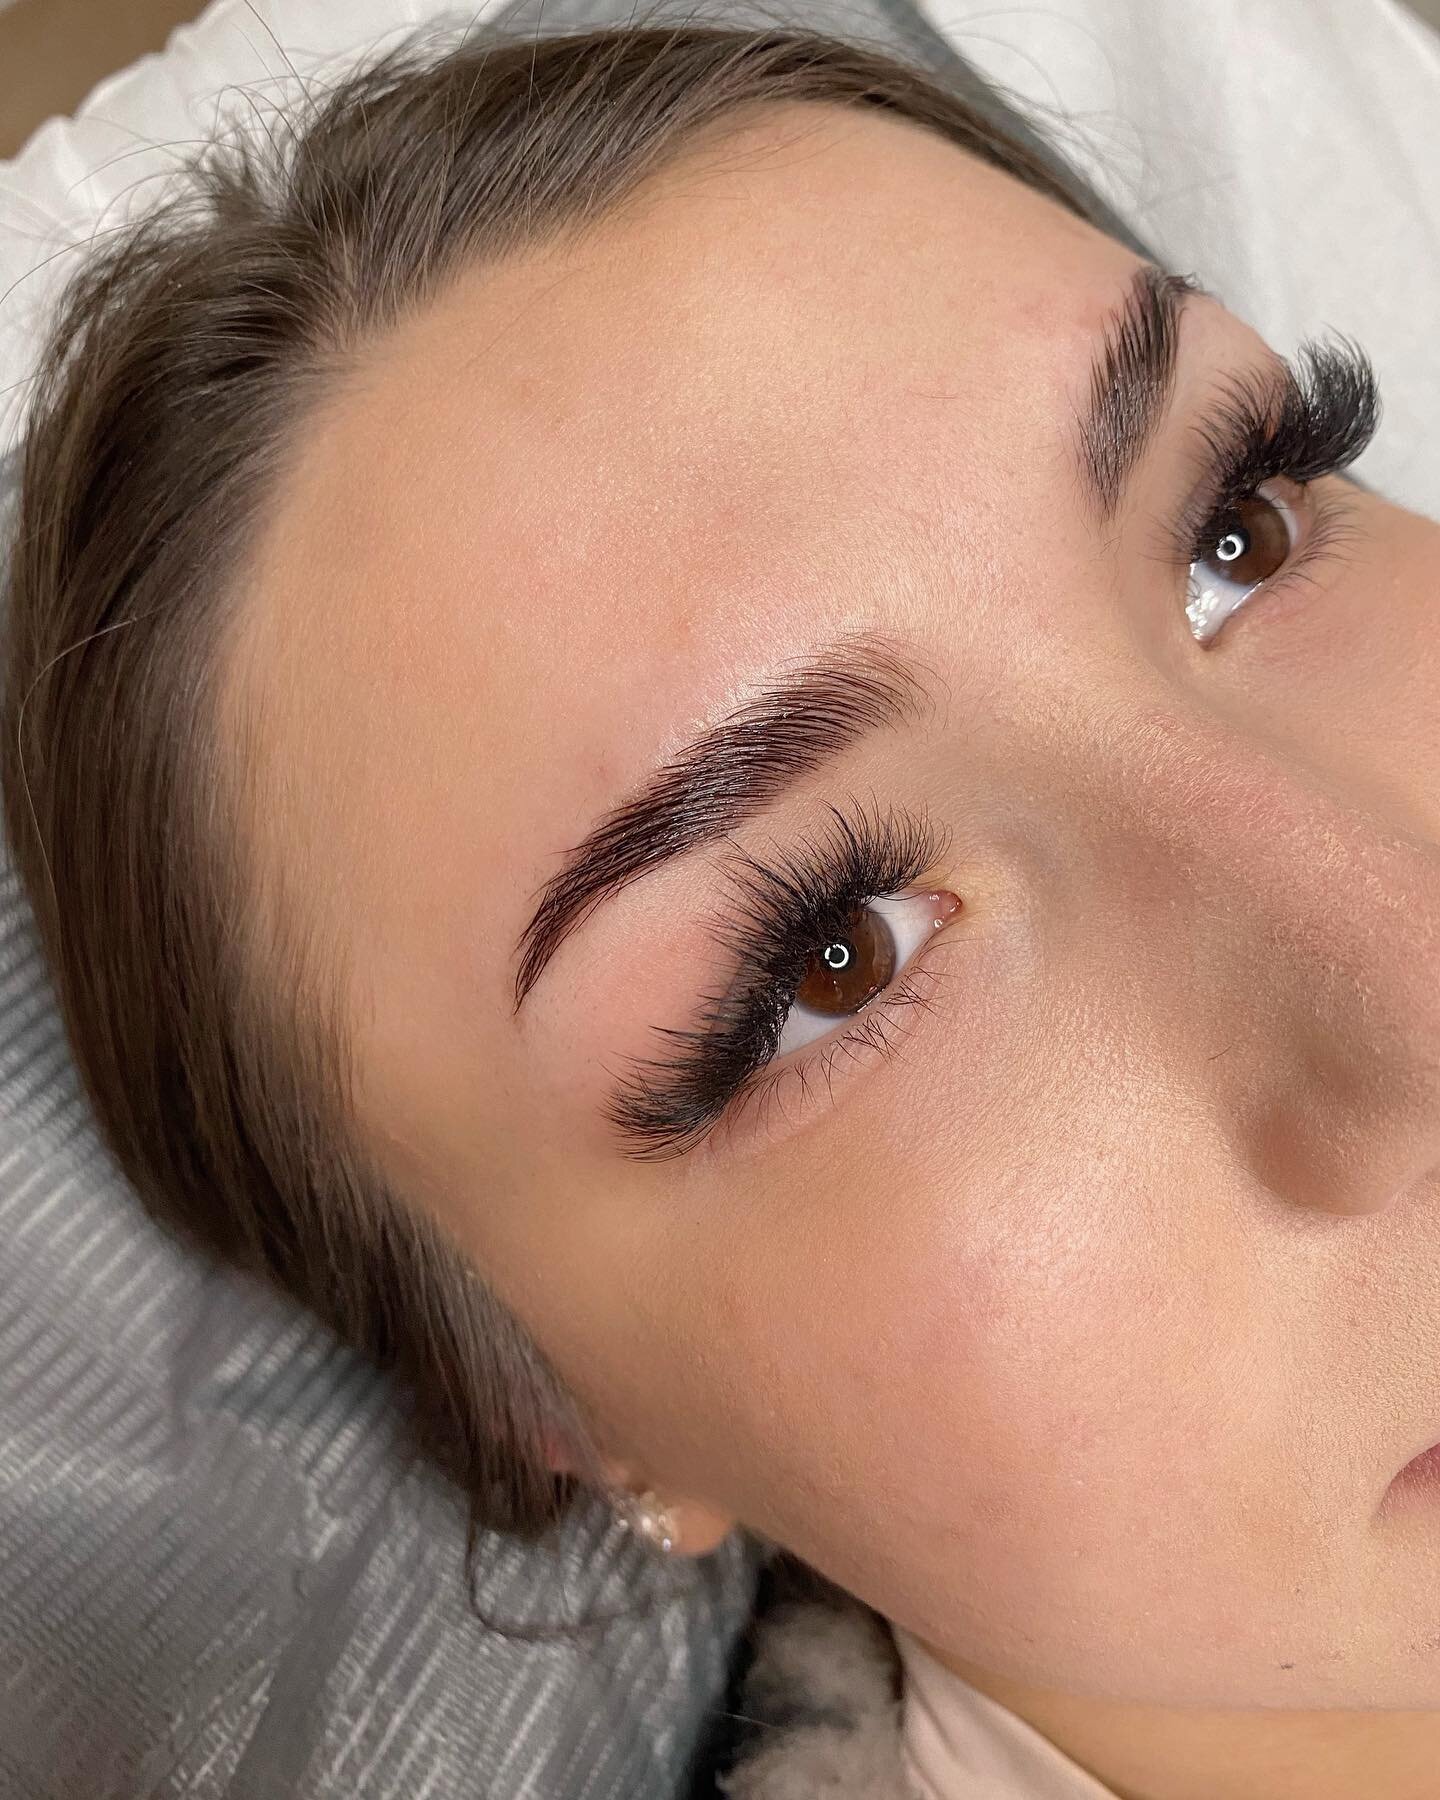 Volume Lashes &amp; Brow Lamination. A match made in heaven😇
Lashes by @tiffanyesthetician